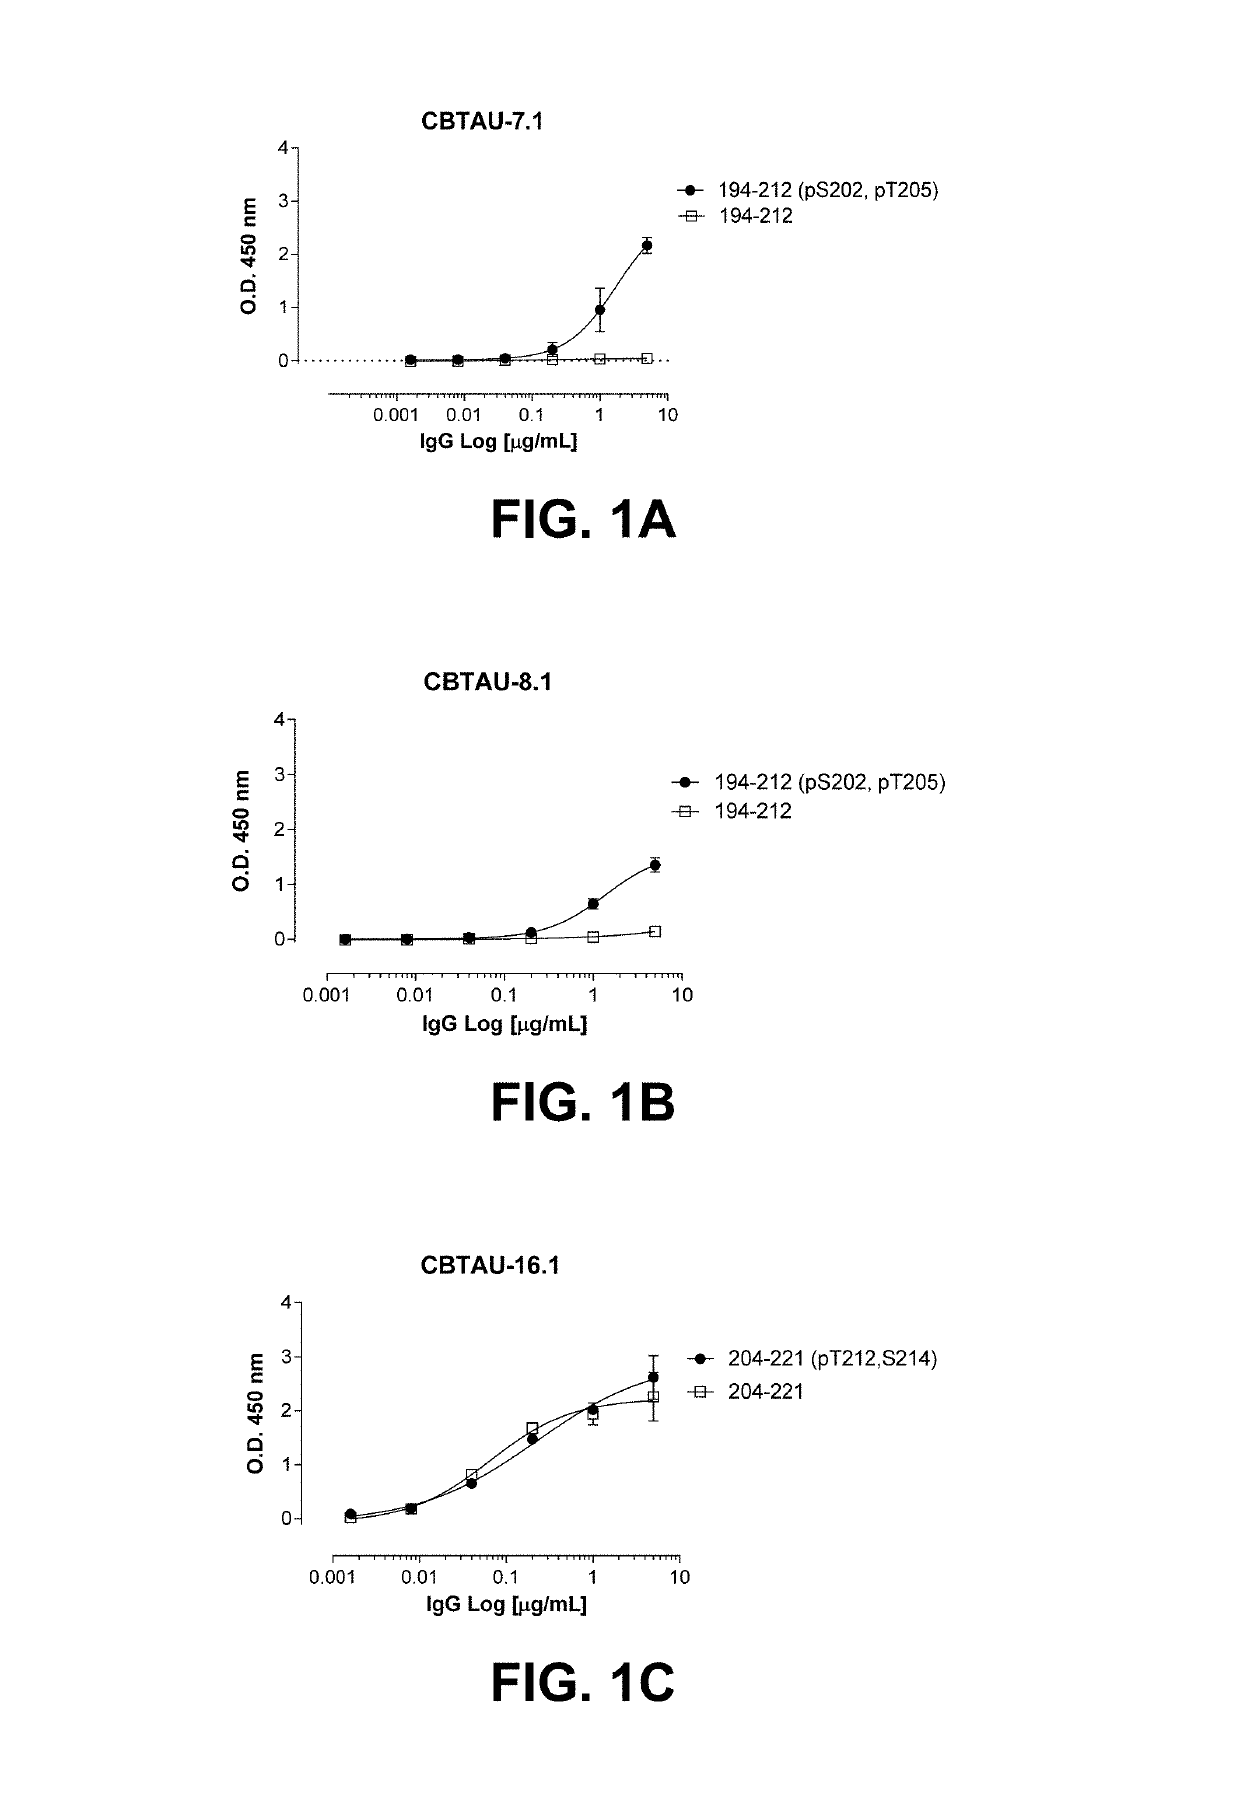 Antibodies and antigen-binding fragments that specifically bind to microtubule-associated protein tau